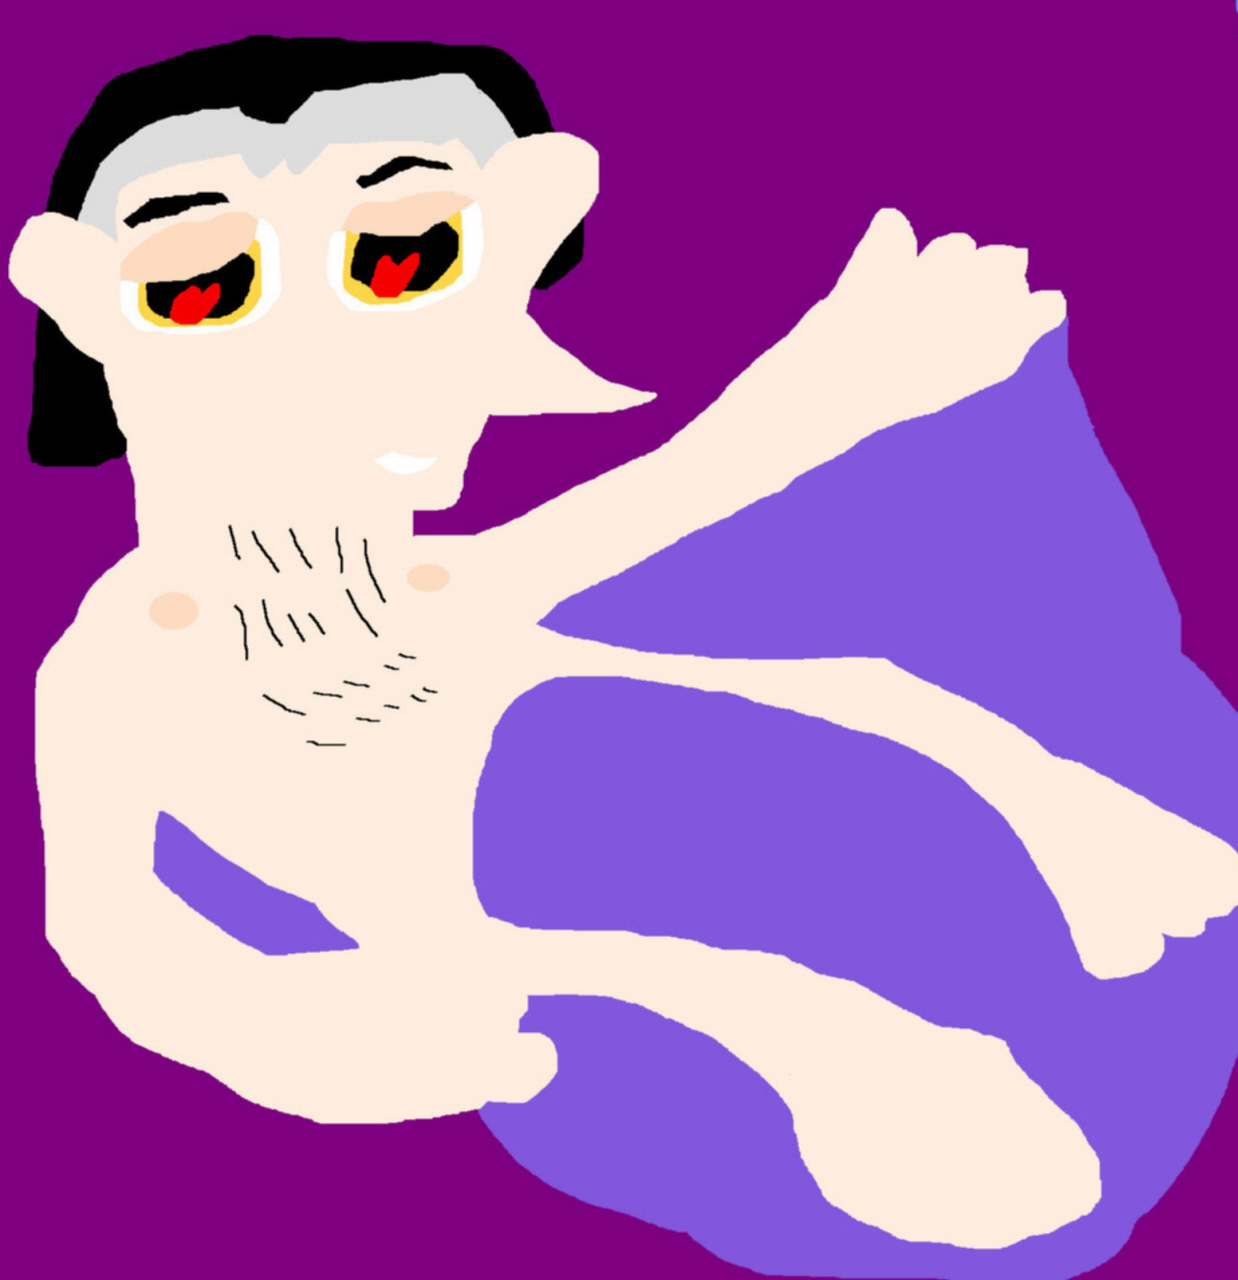 Cedric's Come Hither Look Again Nude Covered Up With Heart Eyes MS Paint by Falconlobo